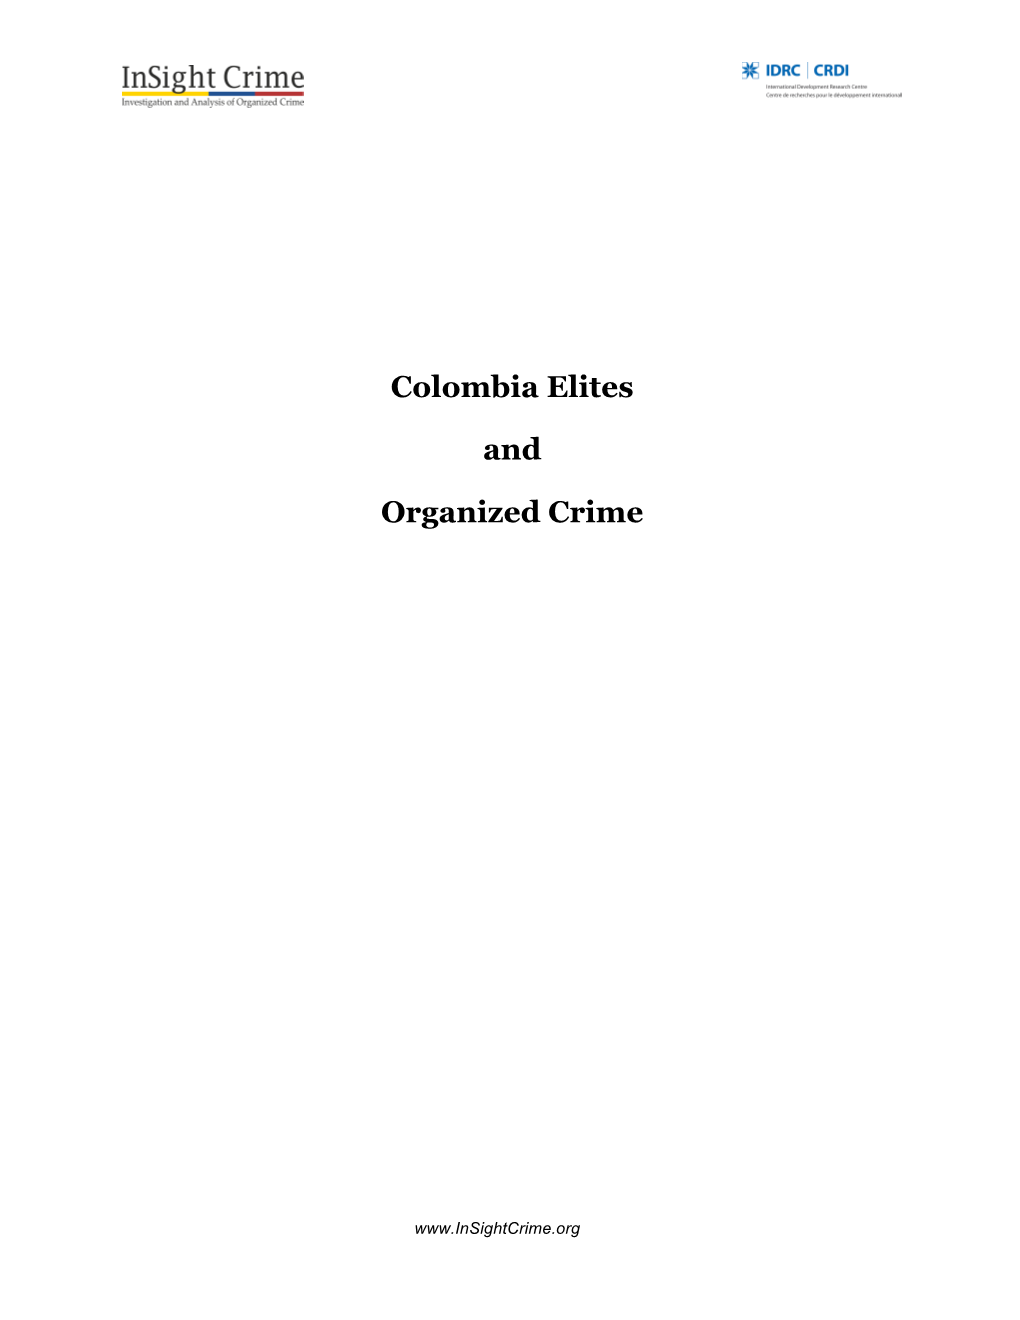 Colombia Elites and Organized Crime